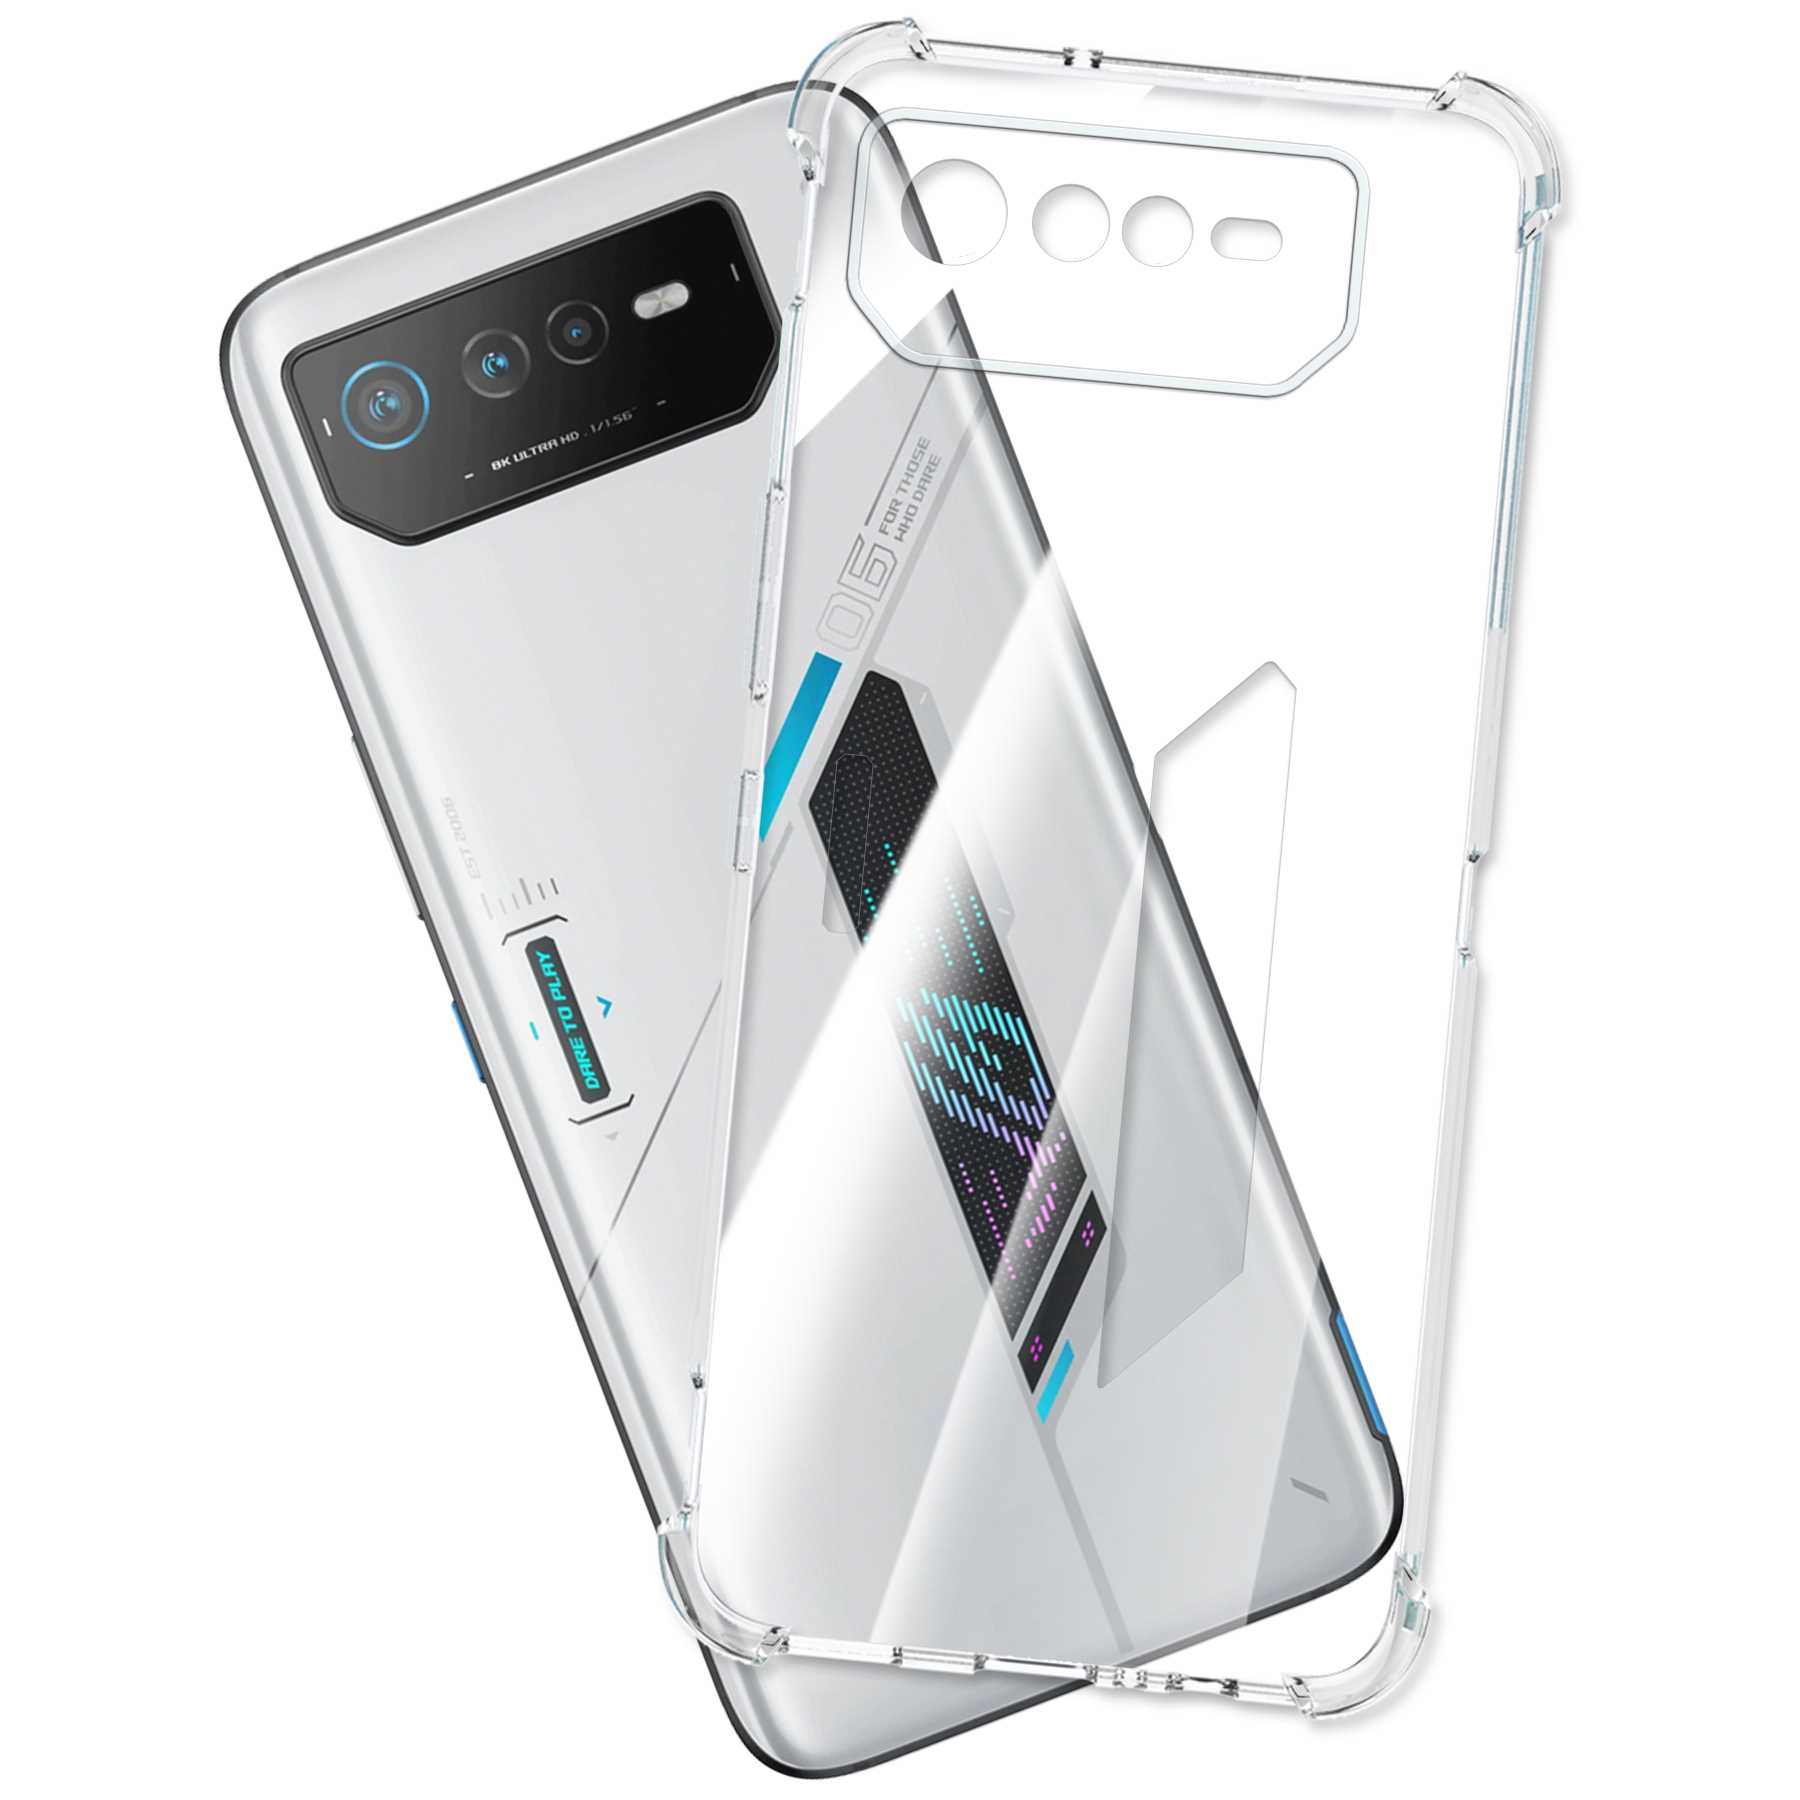 ENERGY Case, MORE Asus, Backcover, ROG MTB Phone 6D, 6, Armor Transparent Clear